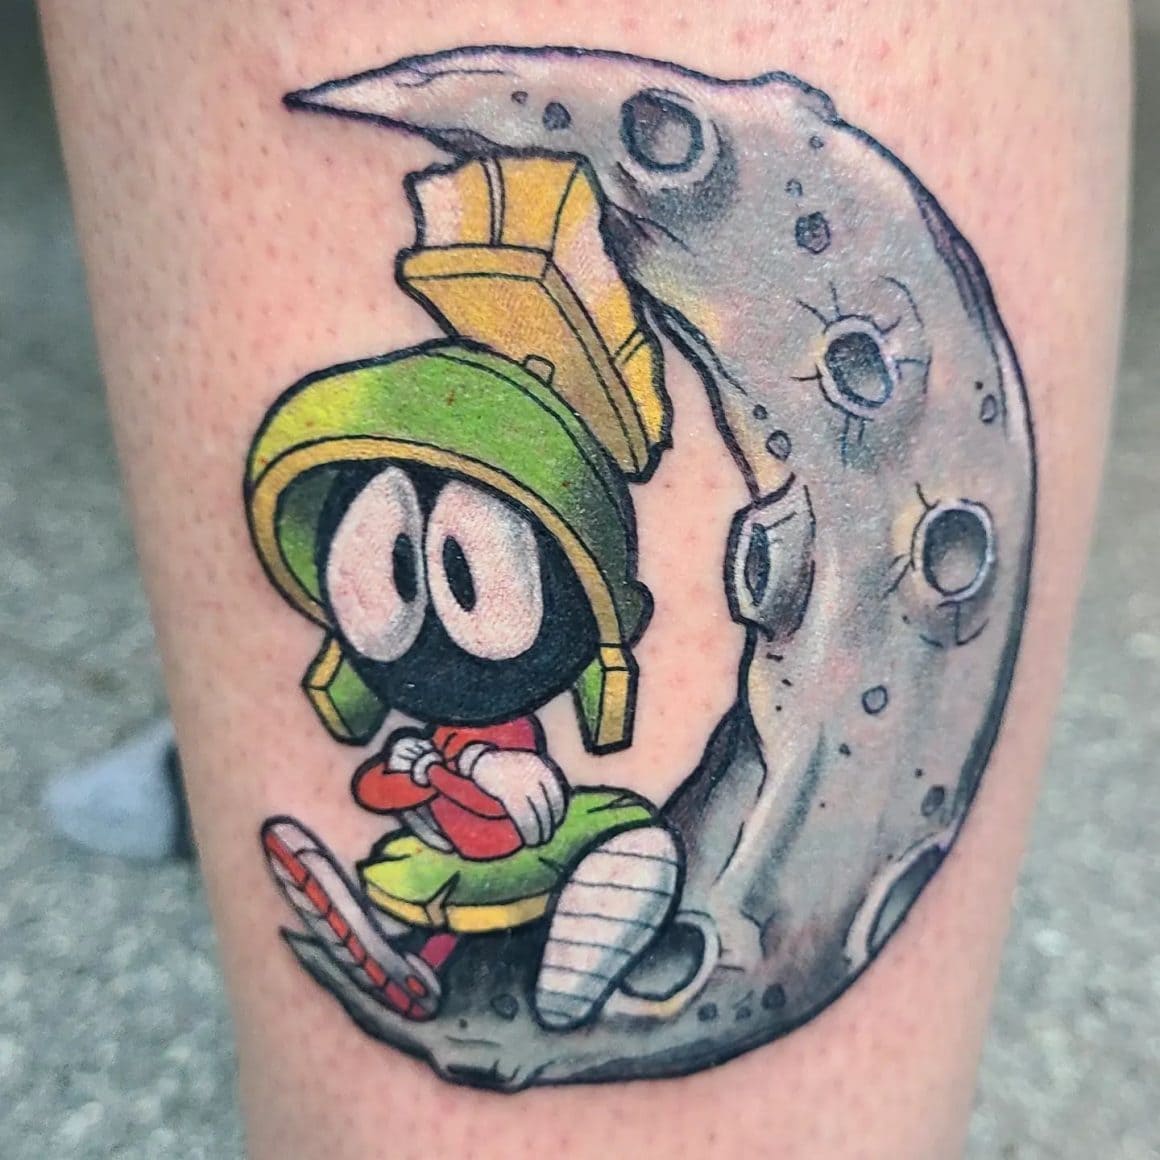 23 Marvin The Martian Tattoos For Another World